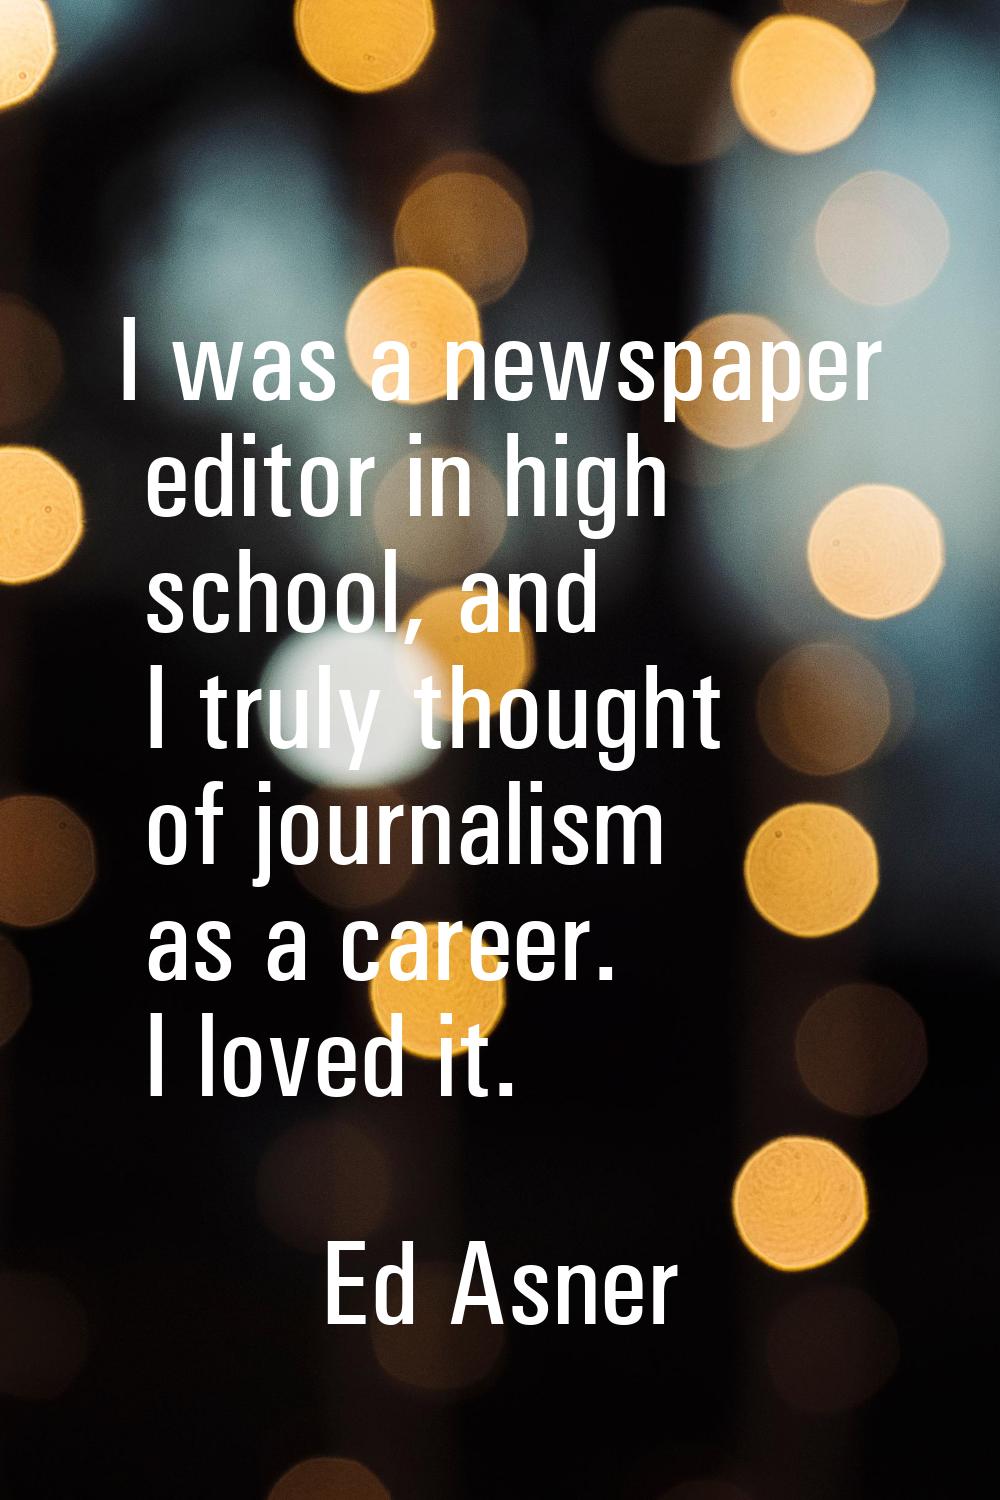 I was a newspaper editor in high school, and I truly thought of journalism as a career. I loved it.